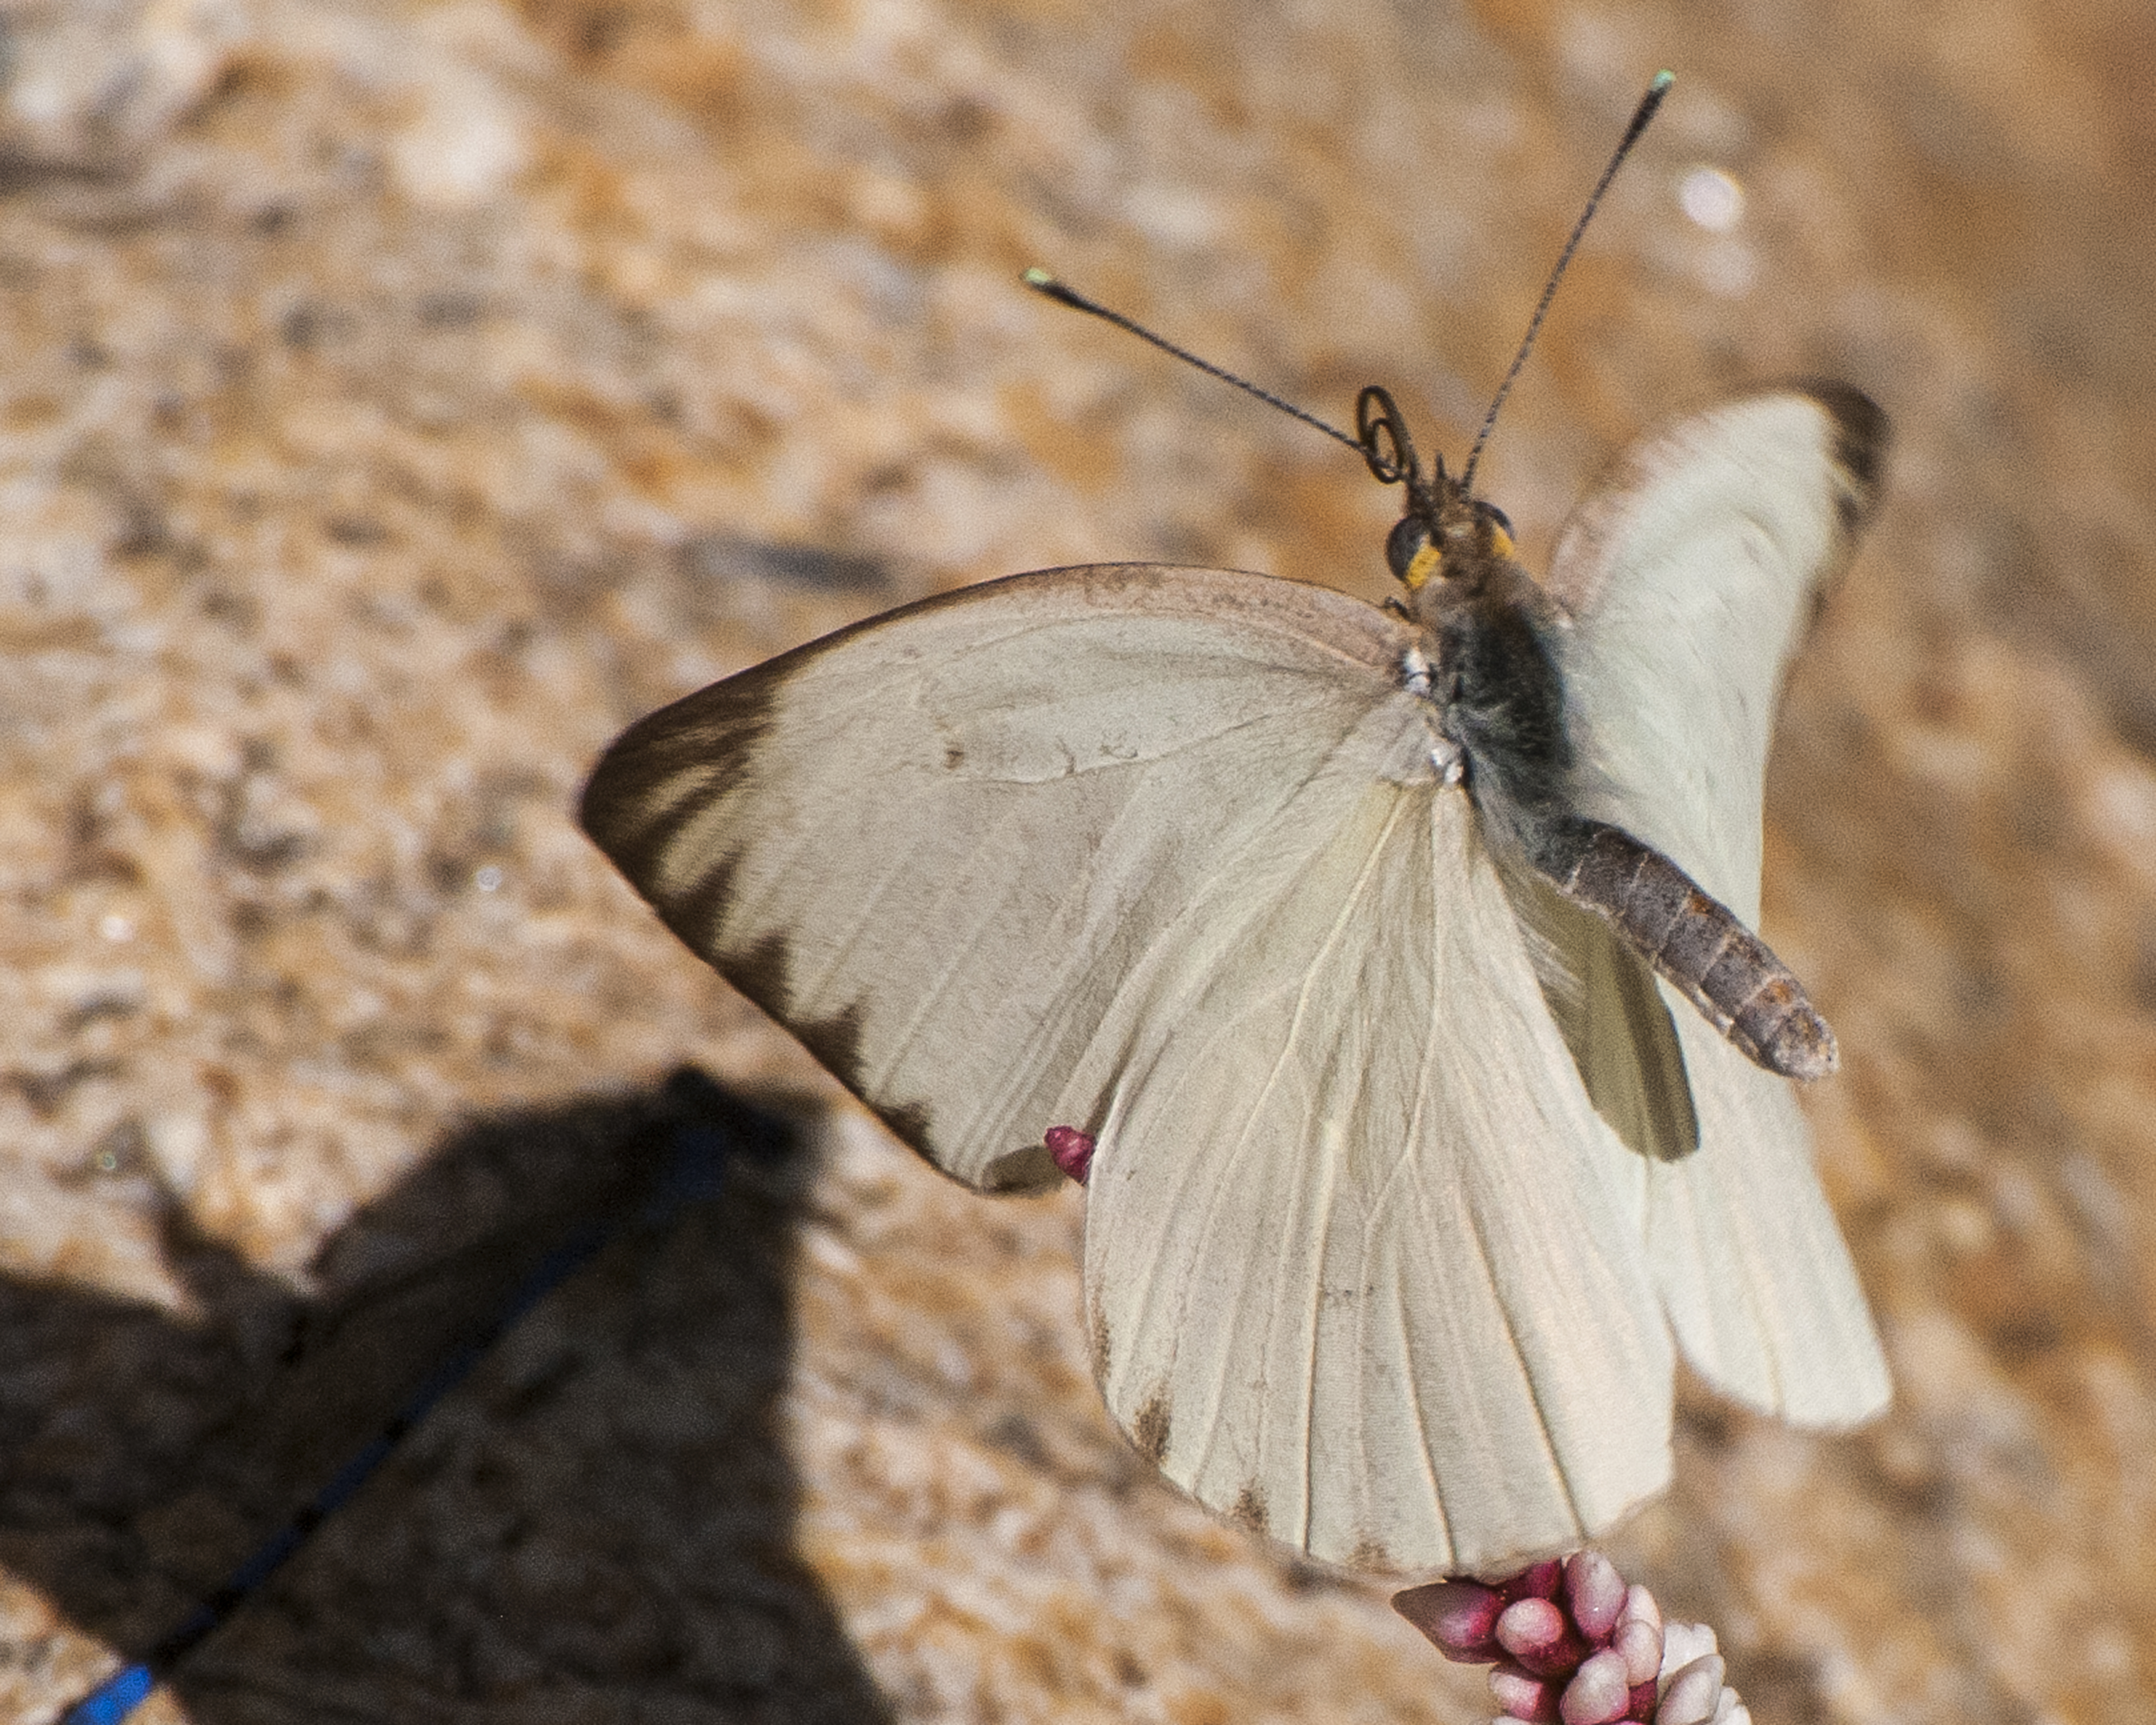 Great Southern White flying